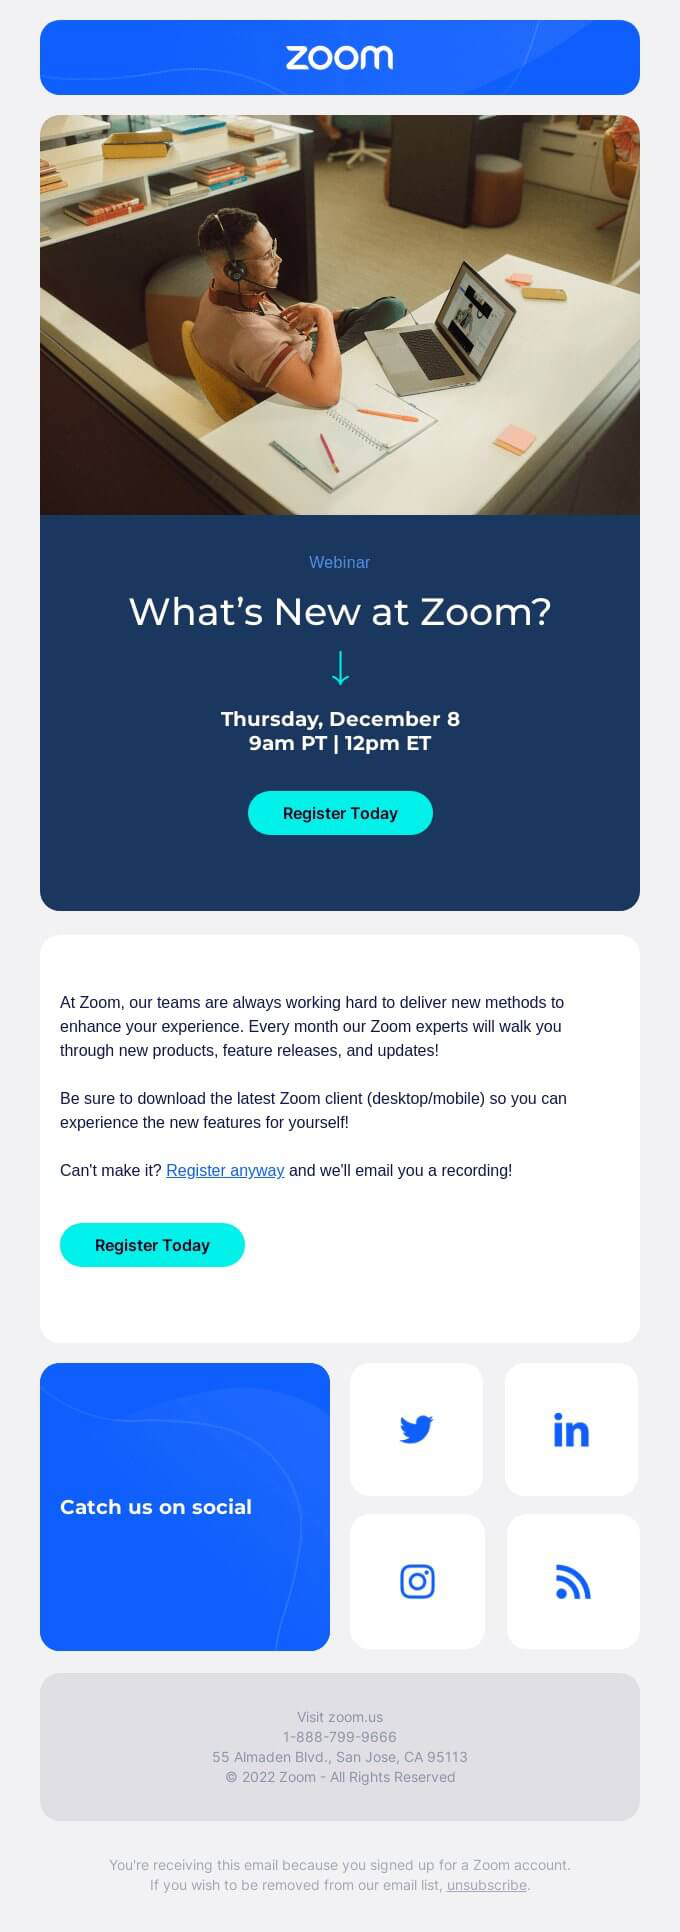 Webinar email example by Zoom